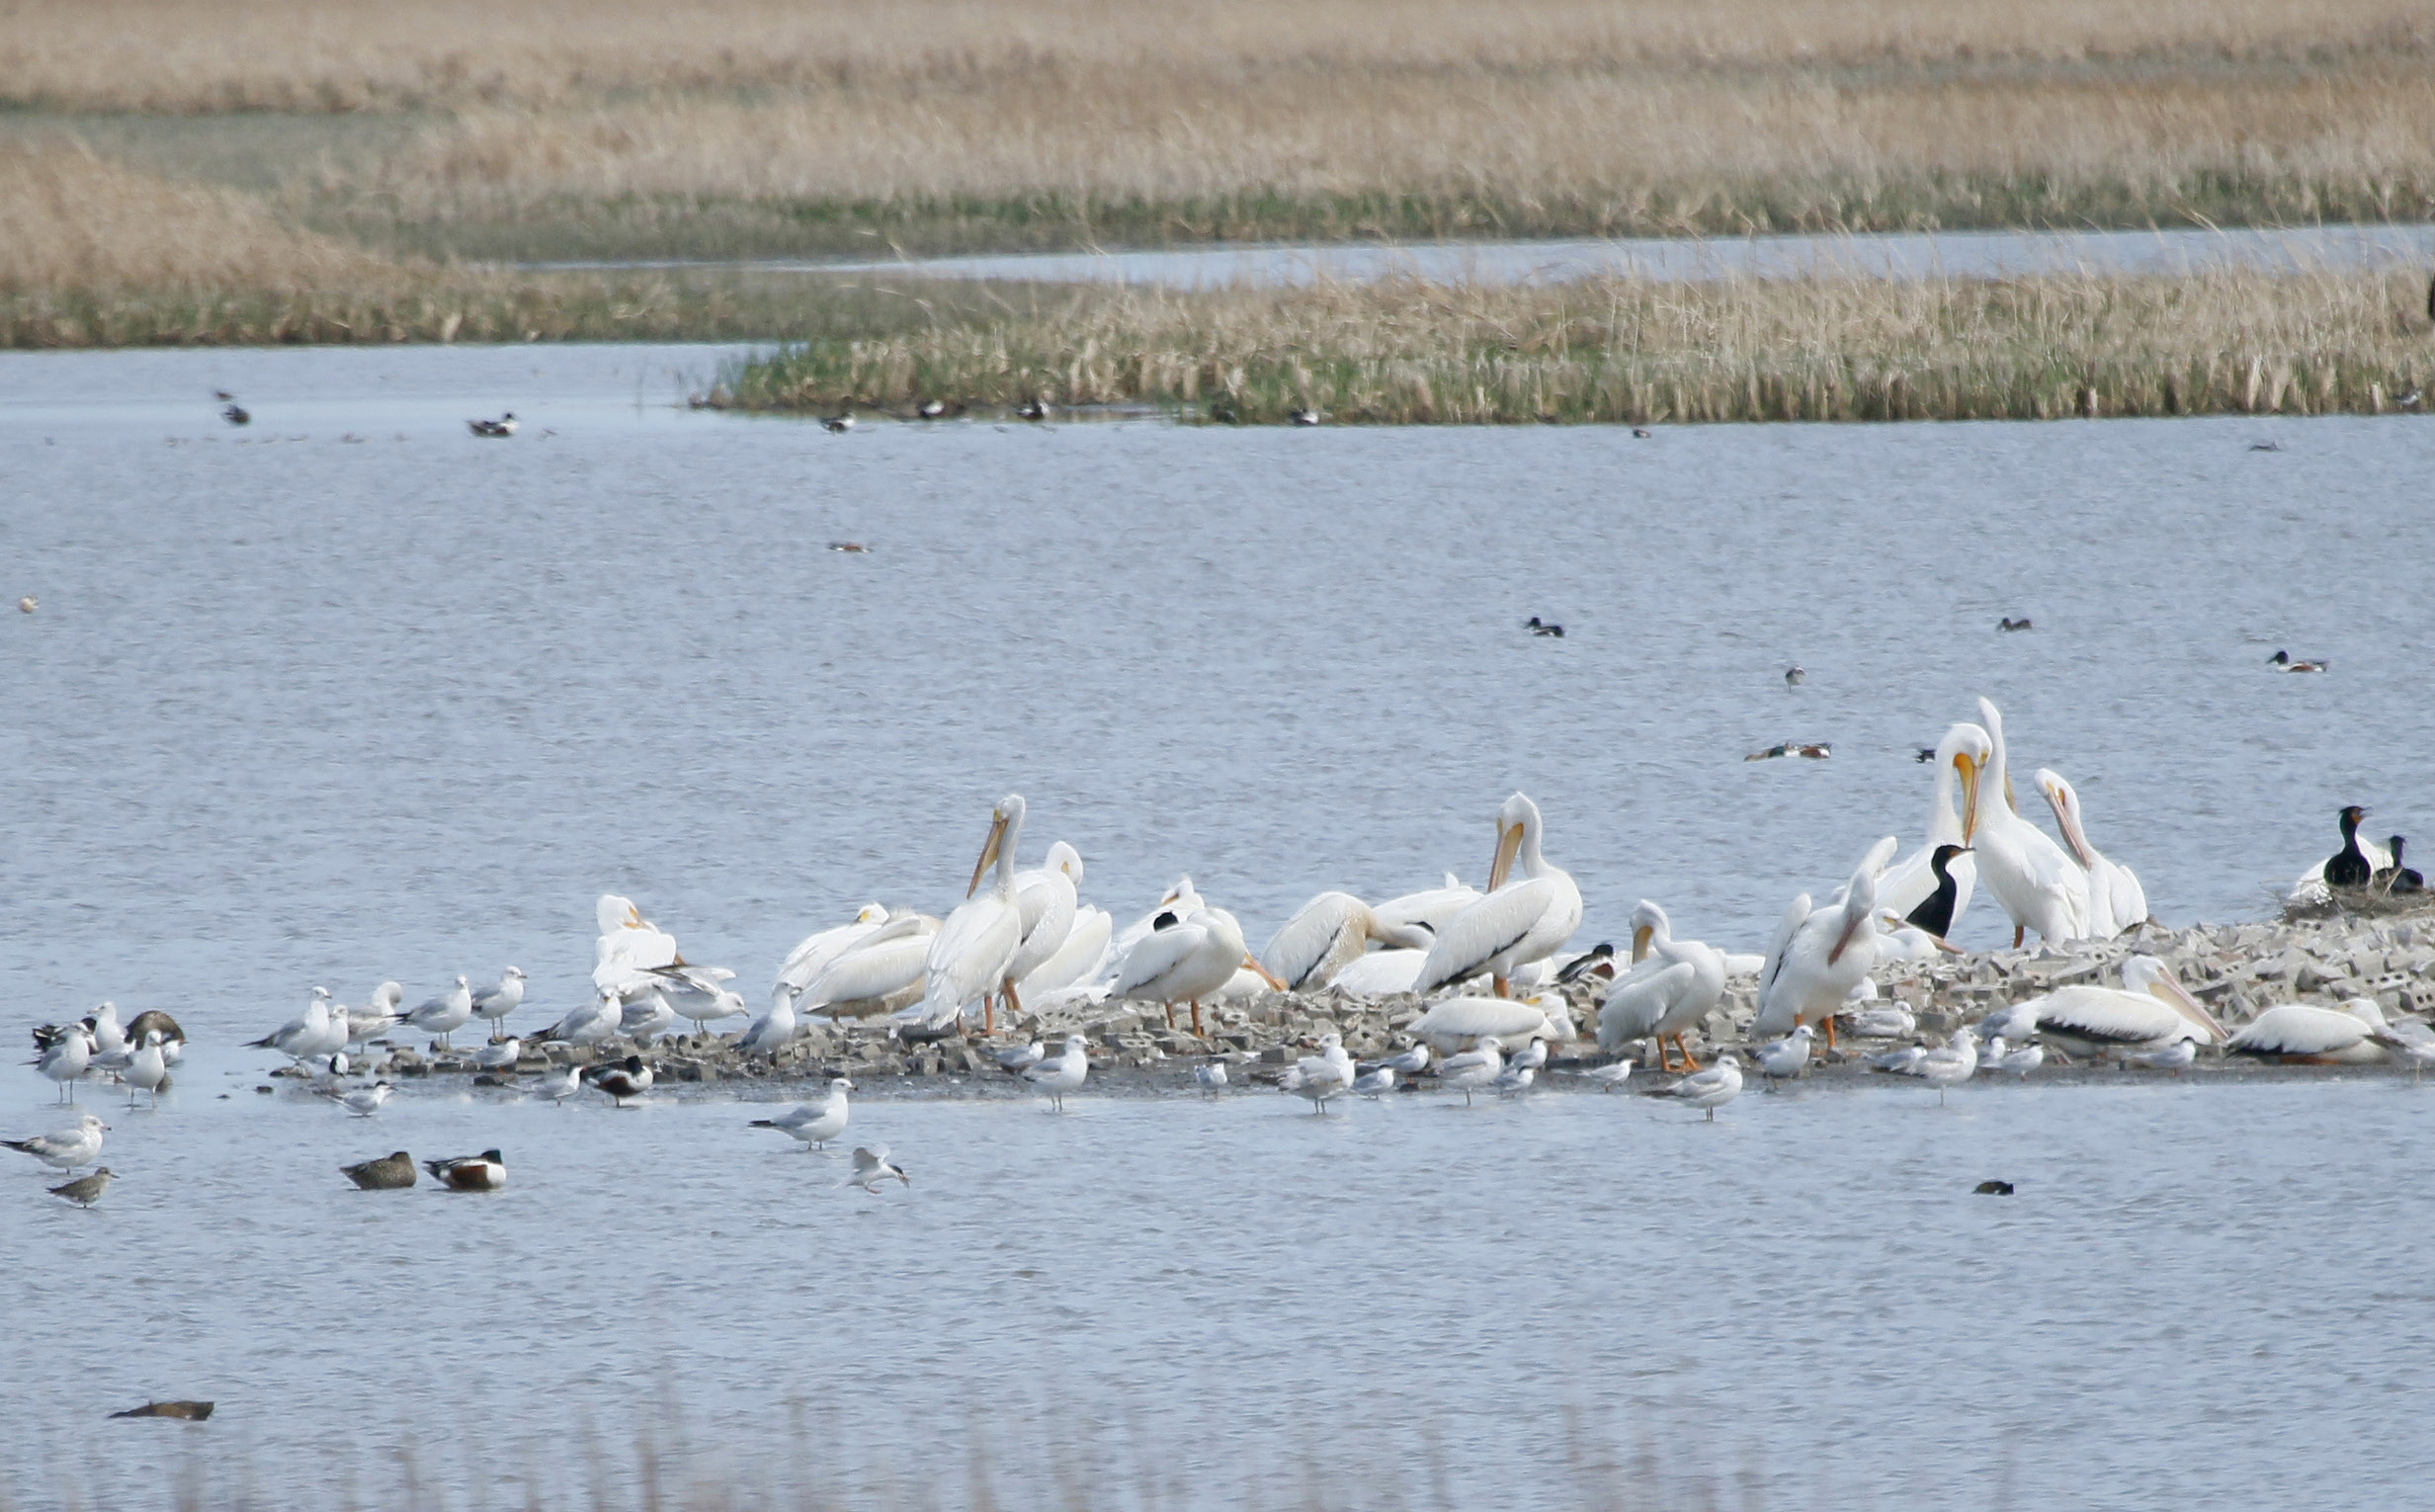 American white pelicans, cormorants, gulls and assorted other waterfowl gather on a spit at Cheyenne Bottoms. photos by Kaleb Kroeker unless otherwise noted